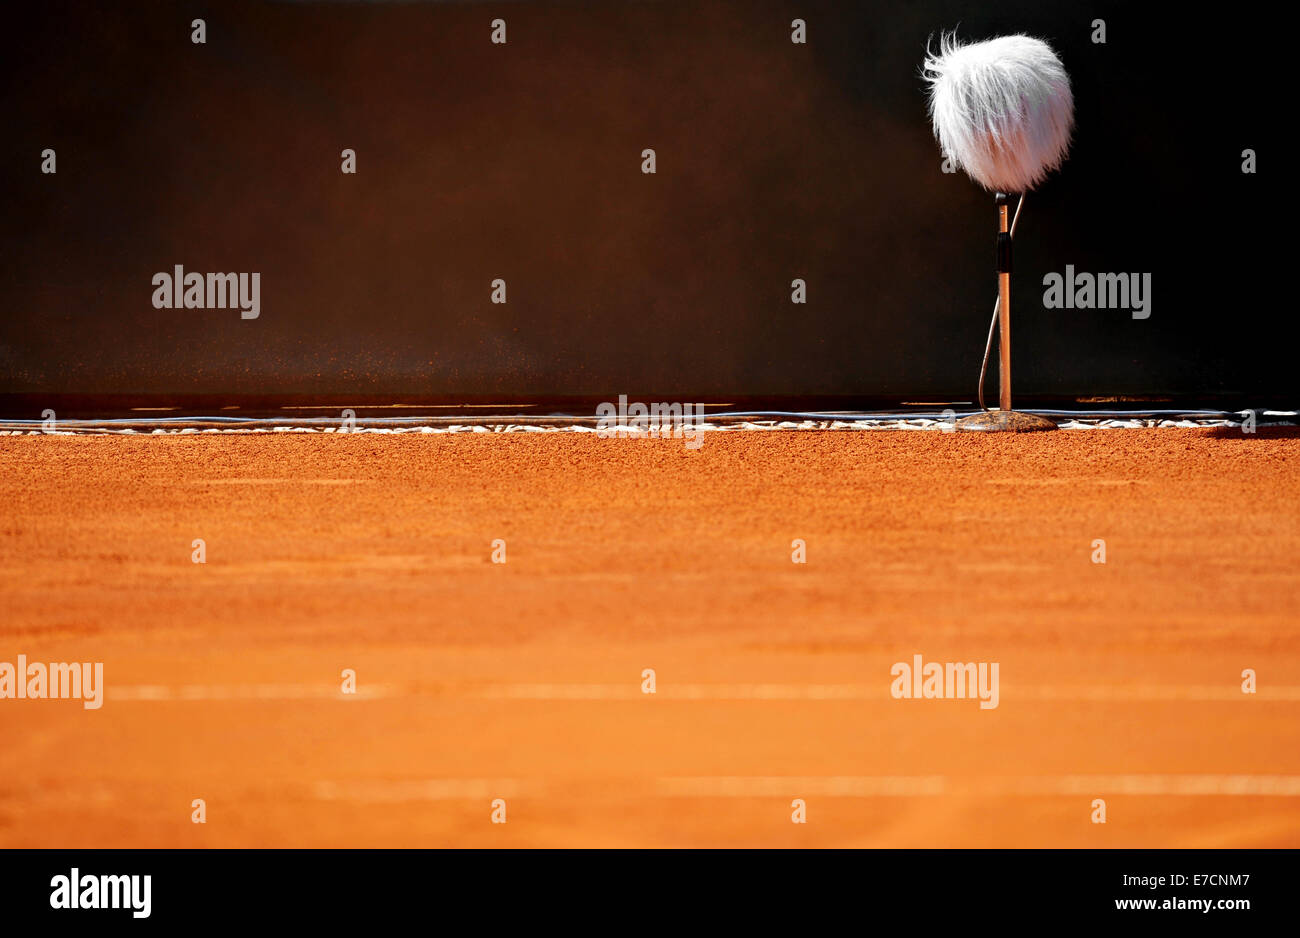 Detail with a professional sport microphone on a clay tennis court Stock Photo